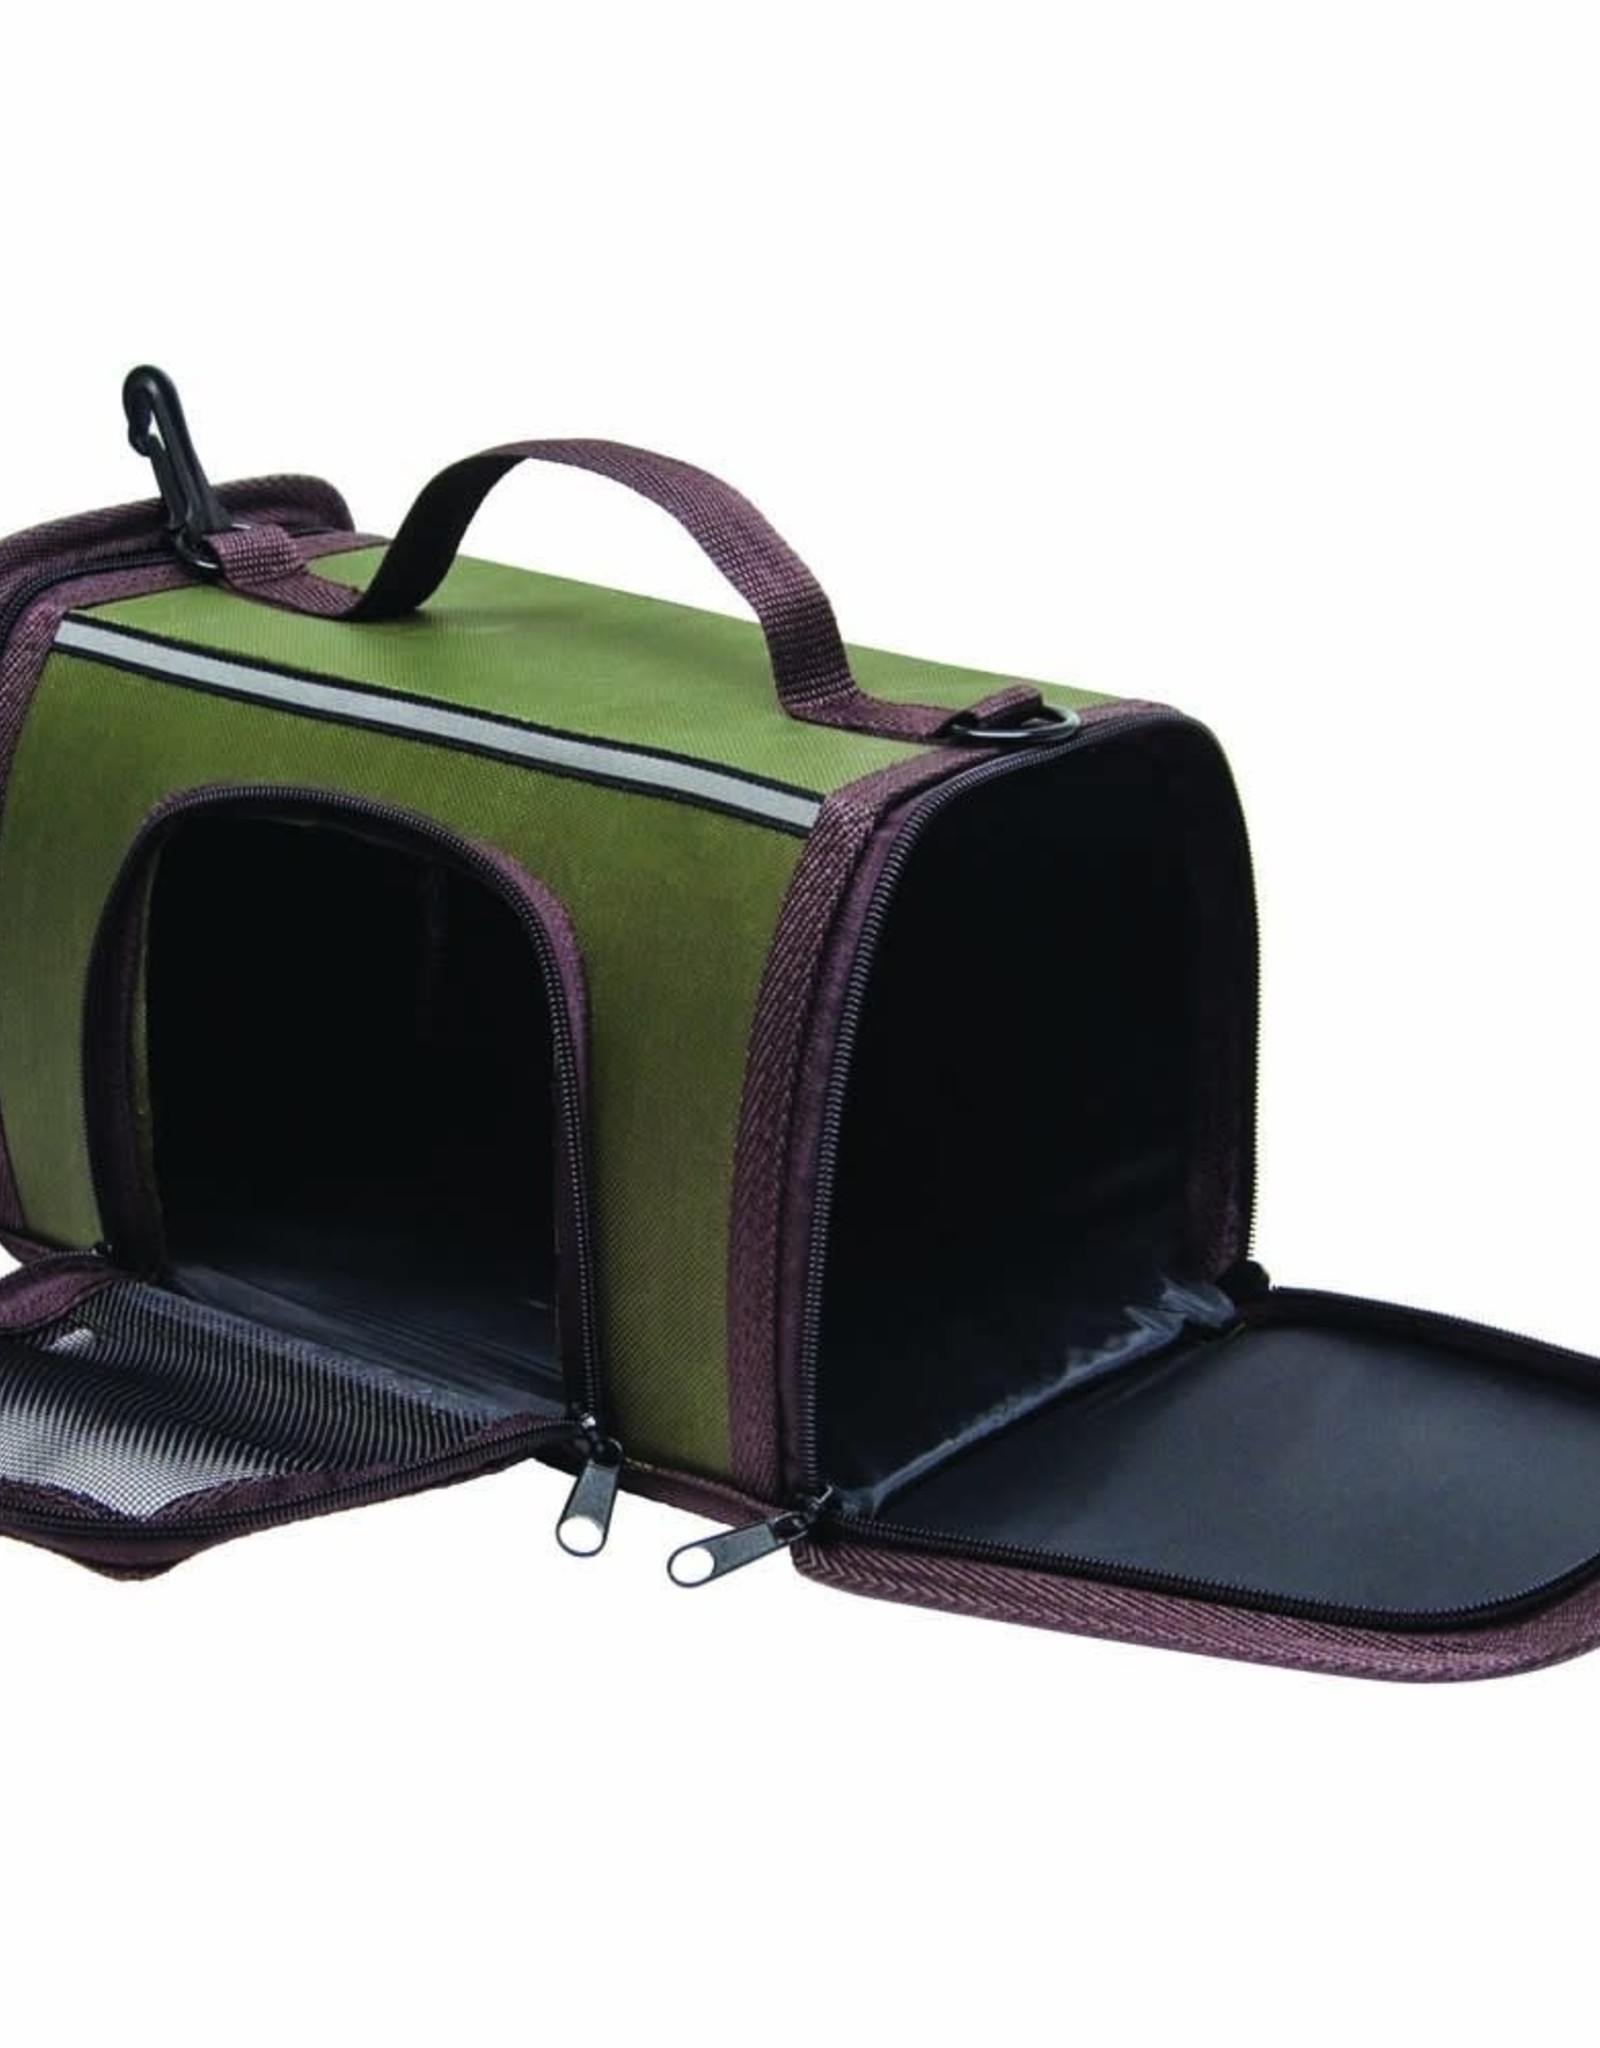 KAYTEE PRODUCTS Kaytee Come Along Pet Carrier Small